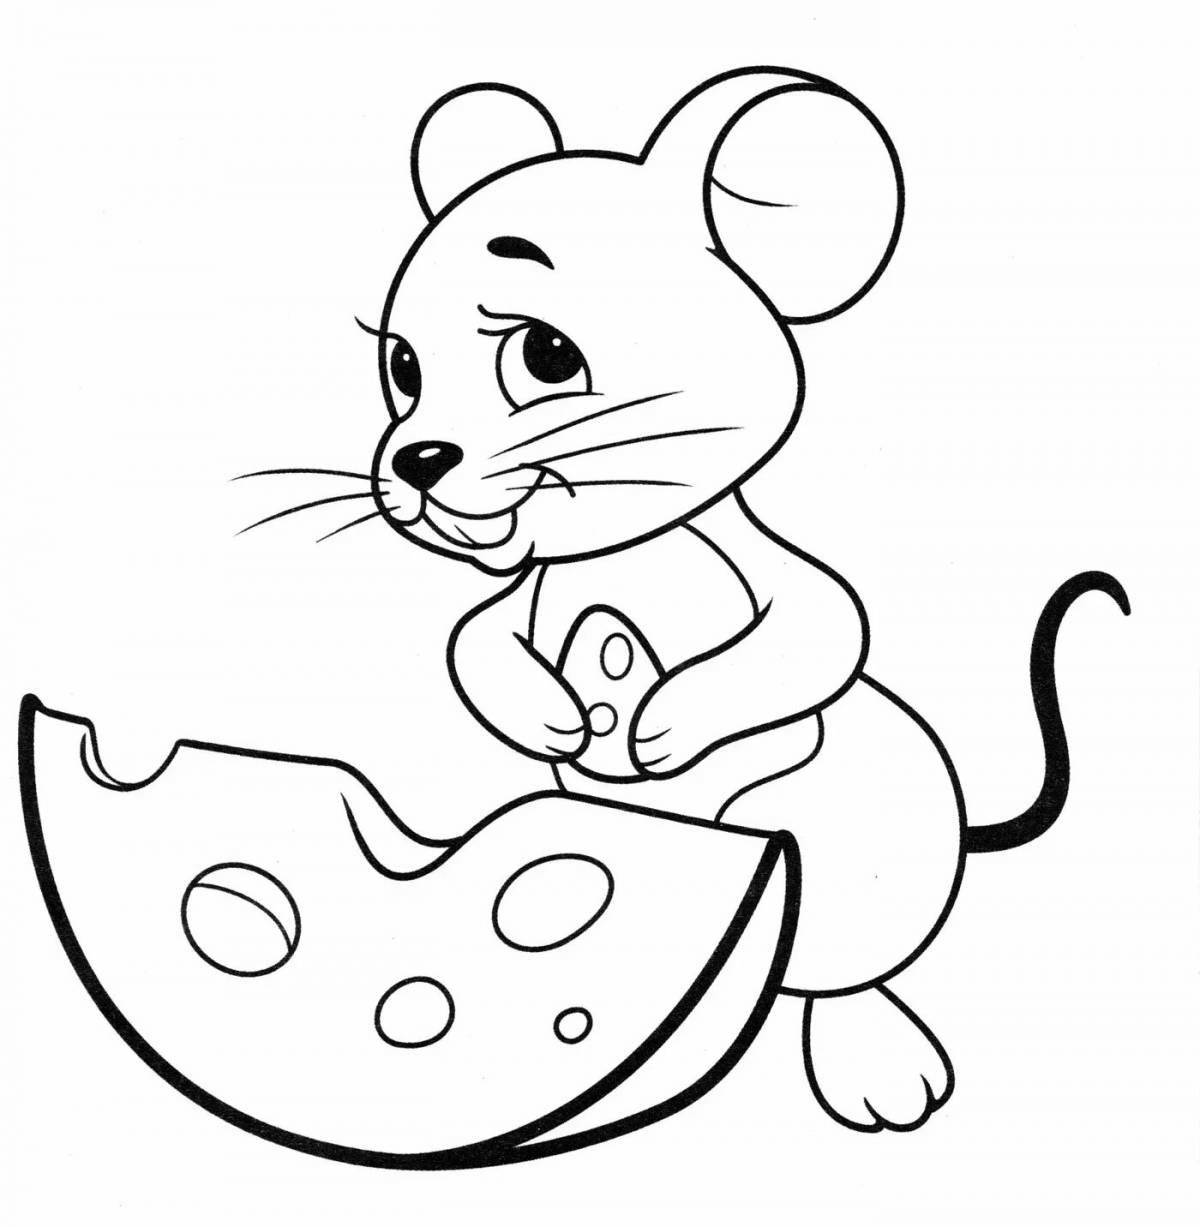 Mouse with cheese #2